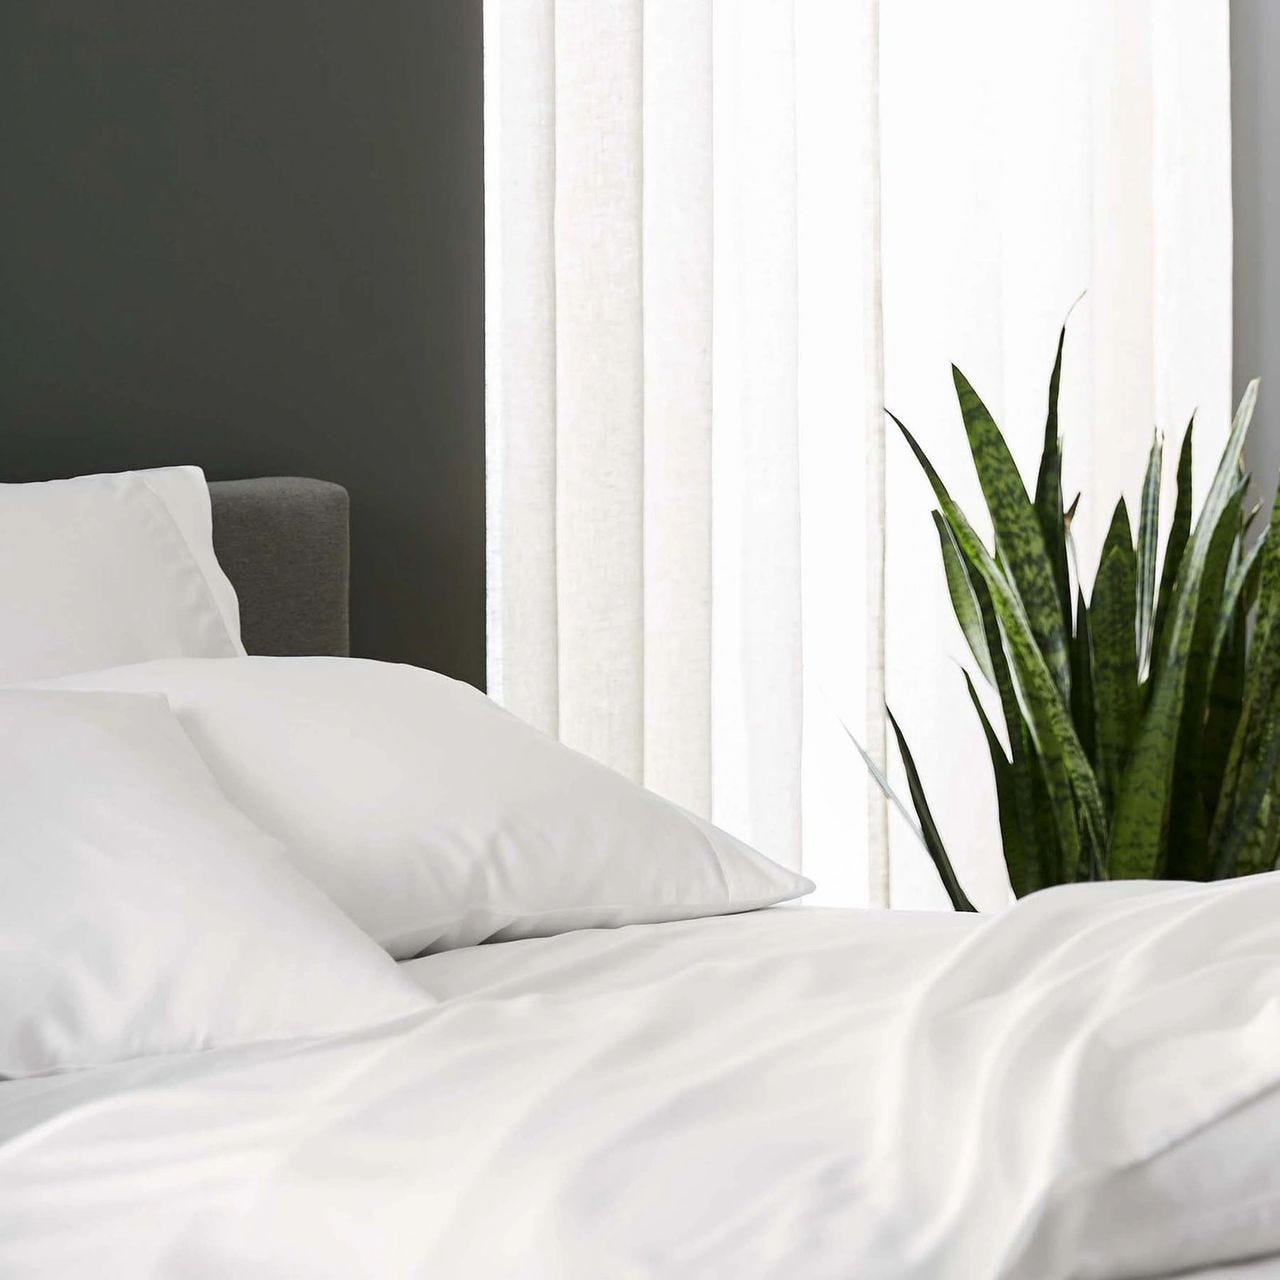 Eucalyptus Tencel Sheets from SijoHome.com for cooler nights.